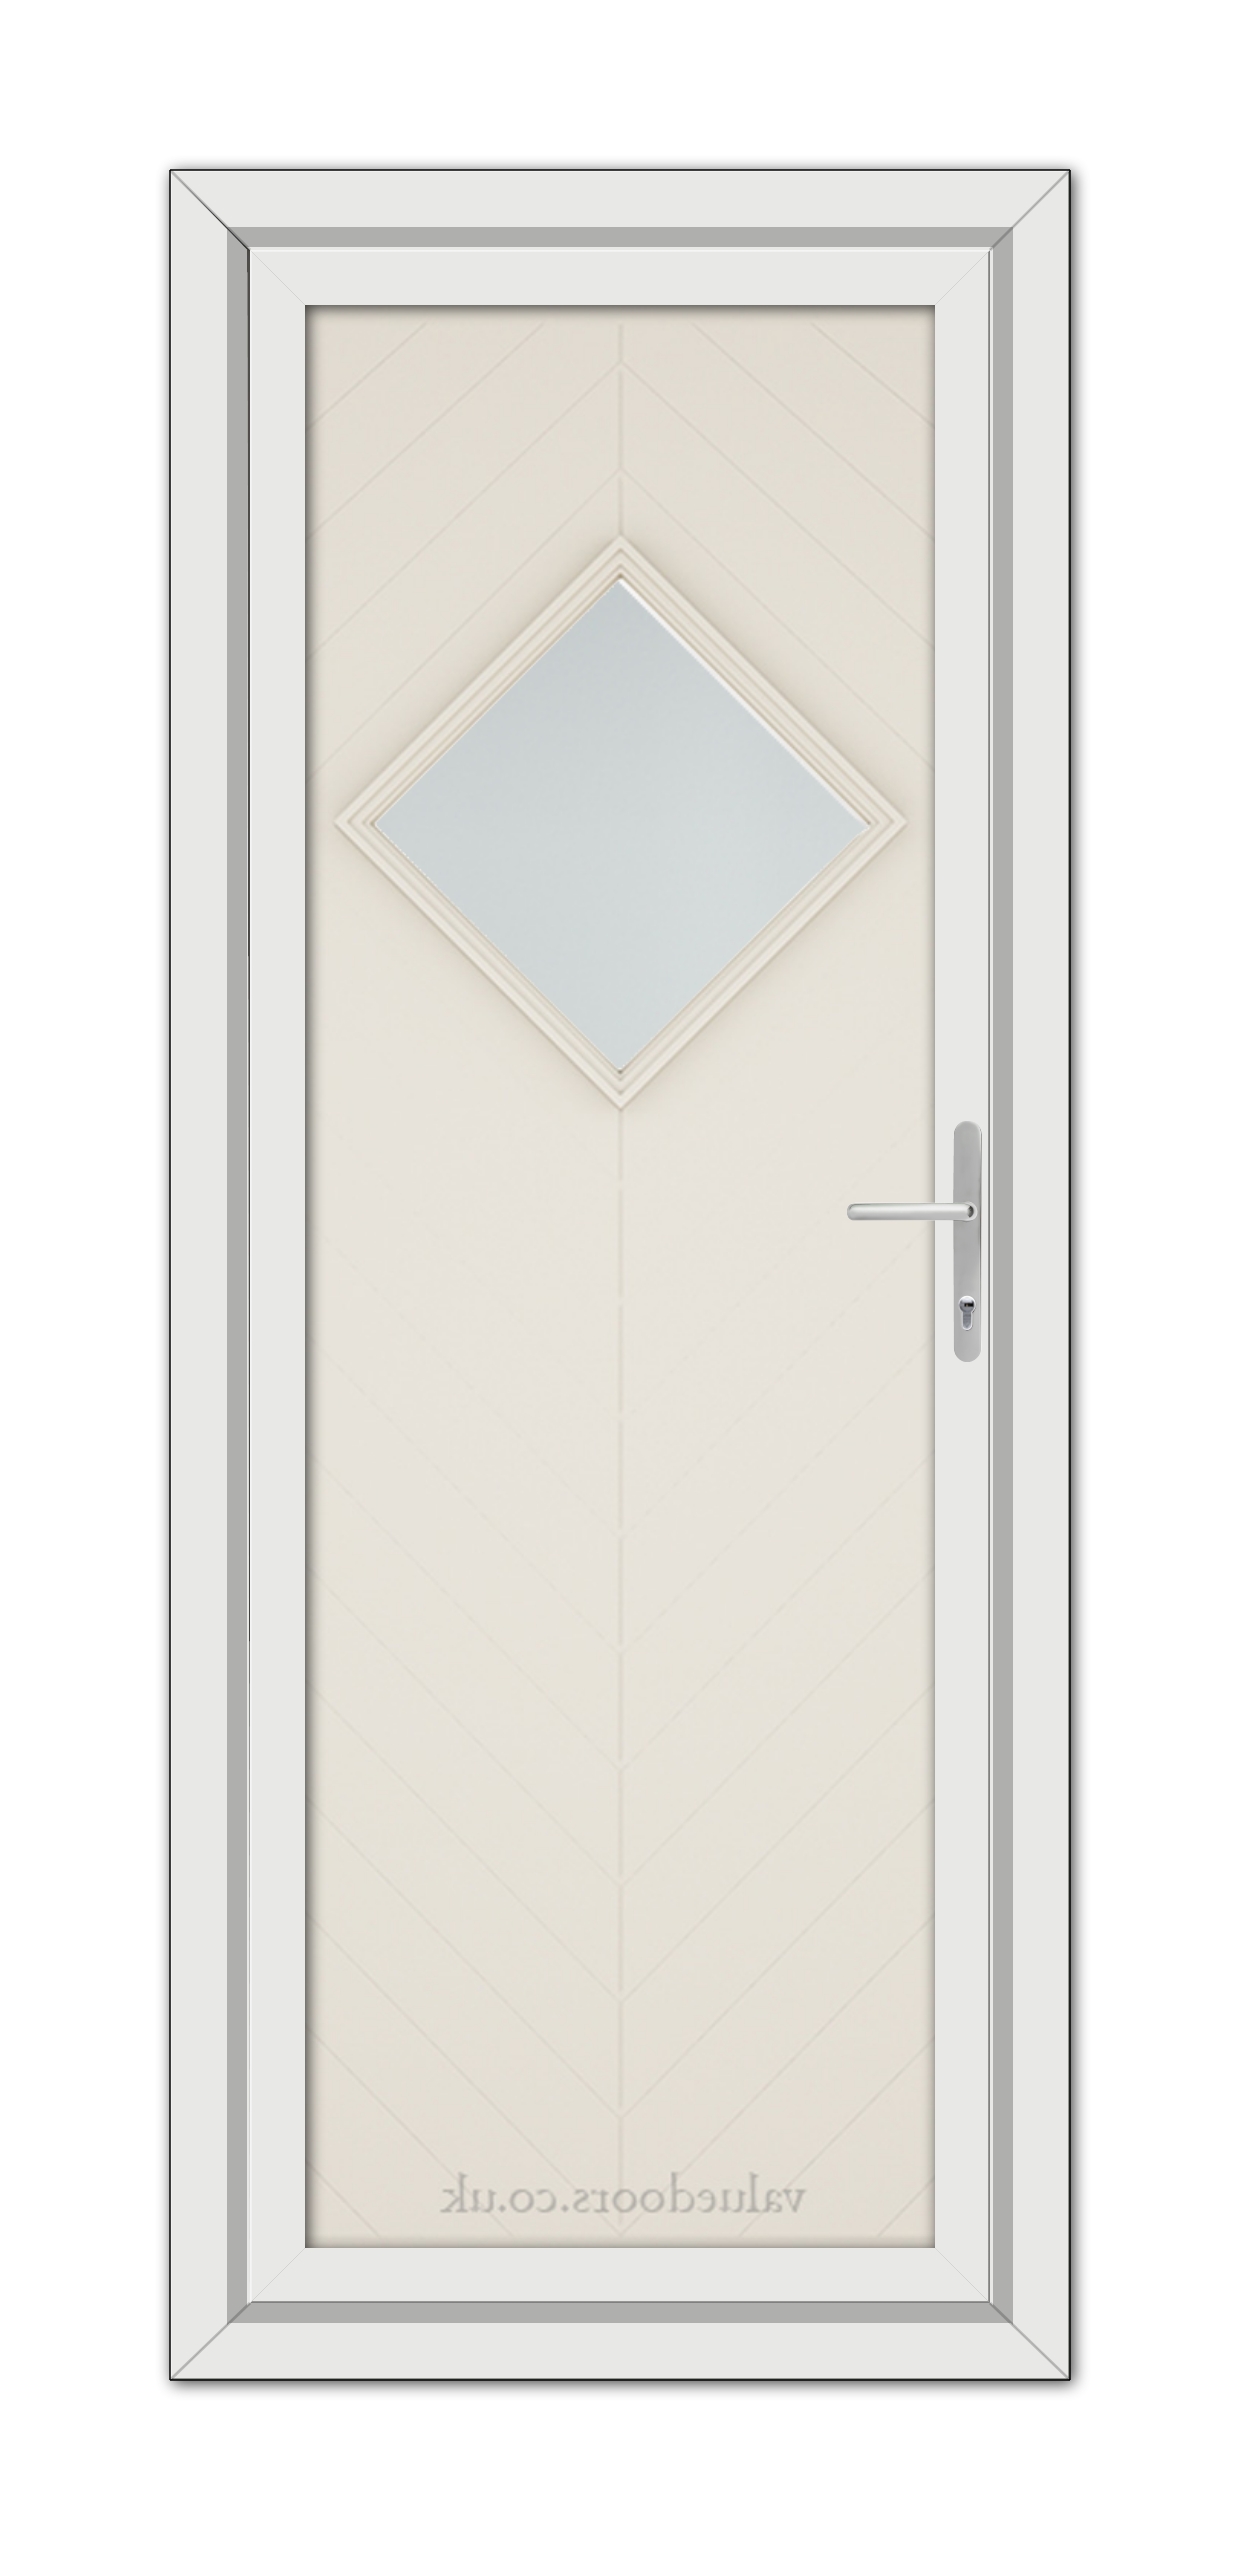 A modern Cream Hamburg uPVC Door with a rhombus-shaped glass window and a metallic handle, viewed from the front.